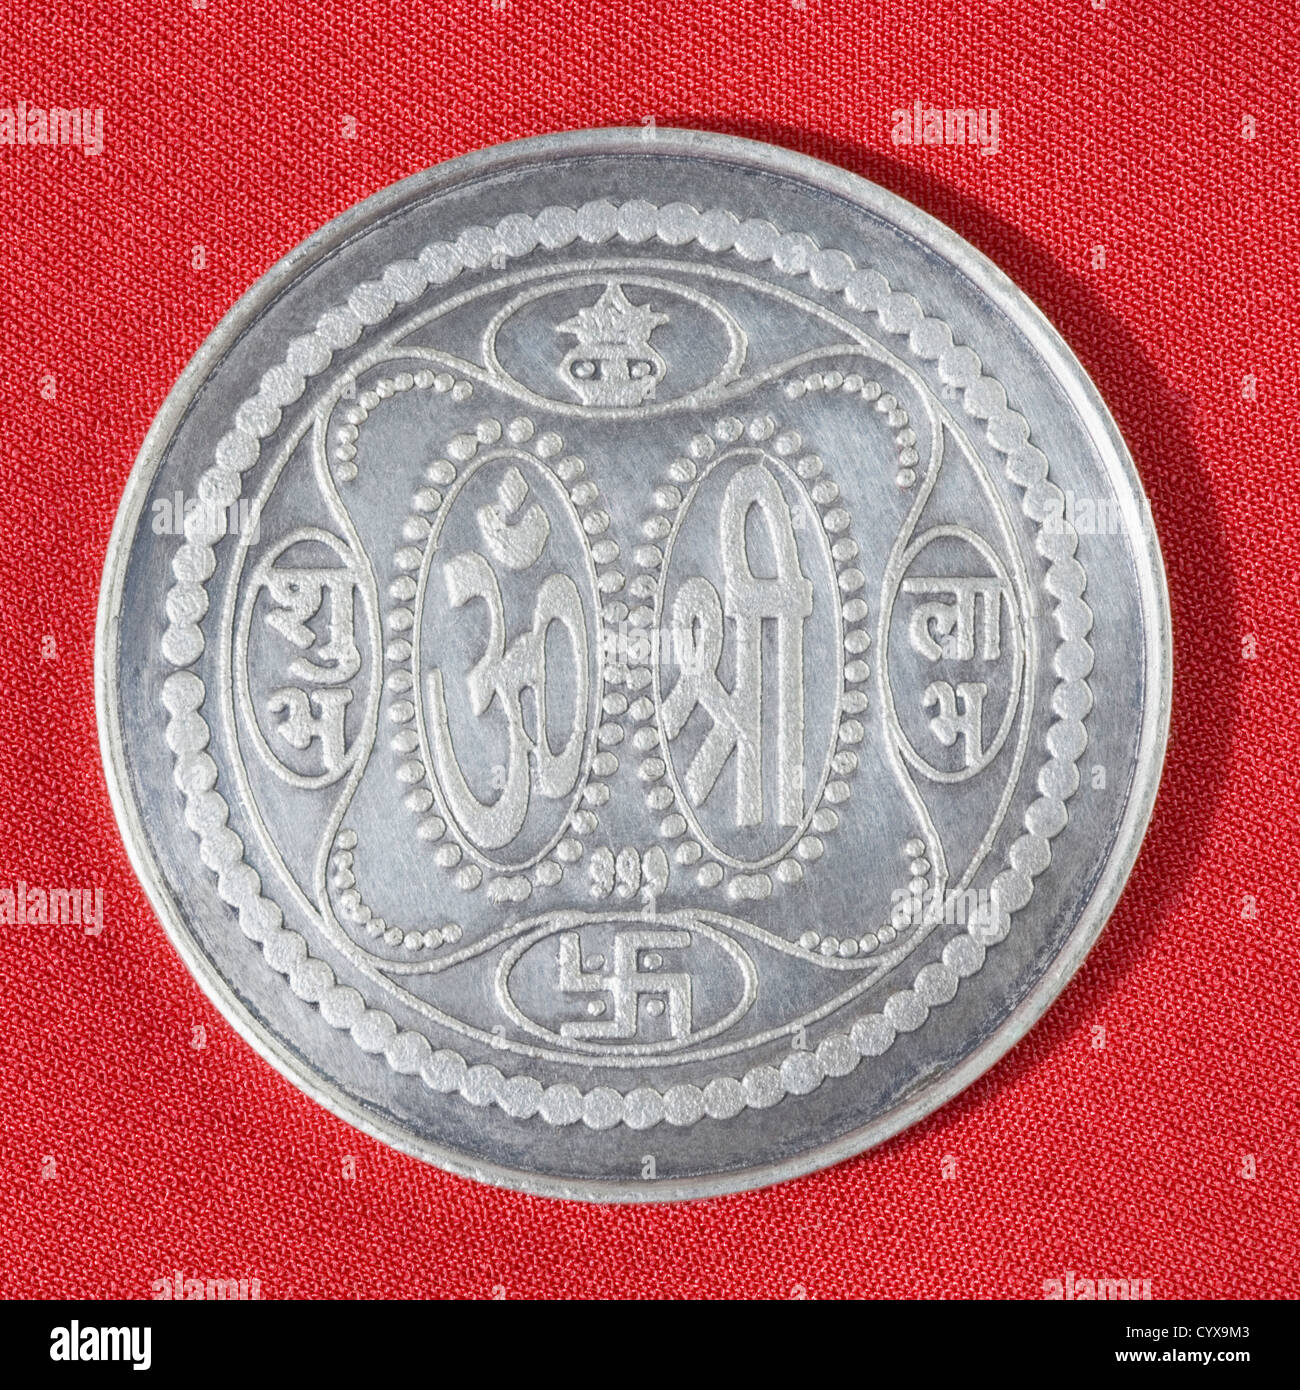 Close-up of a silver coin Stock Photo